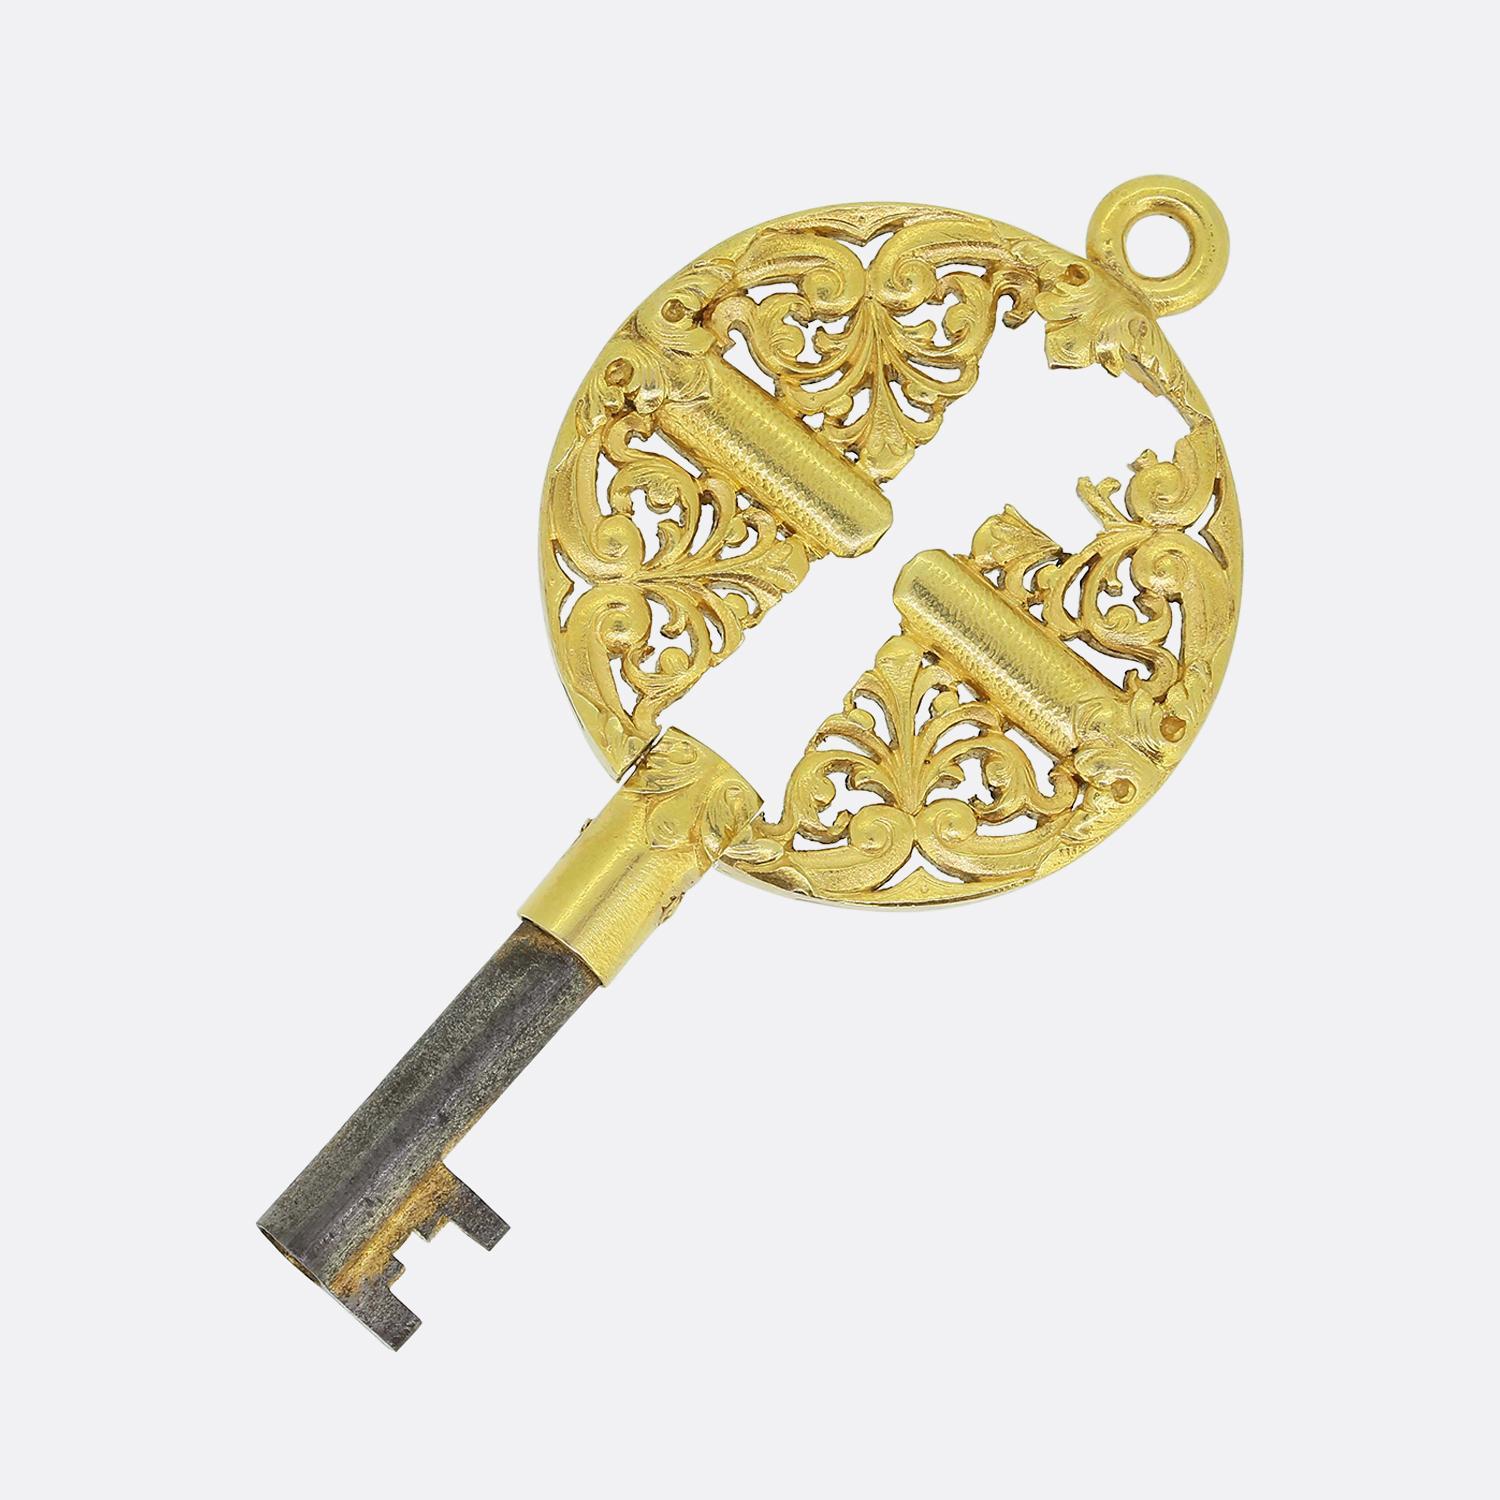 Wièse Watch Key Pendant In Good Condition For Sale In London, GB